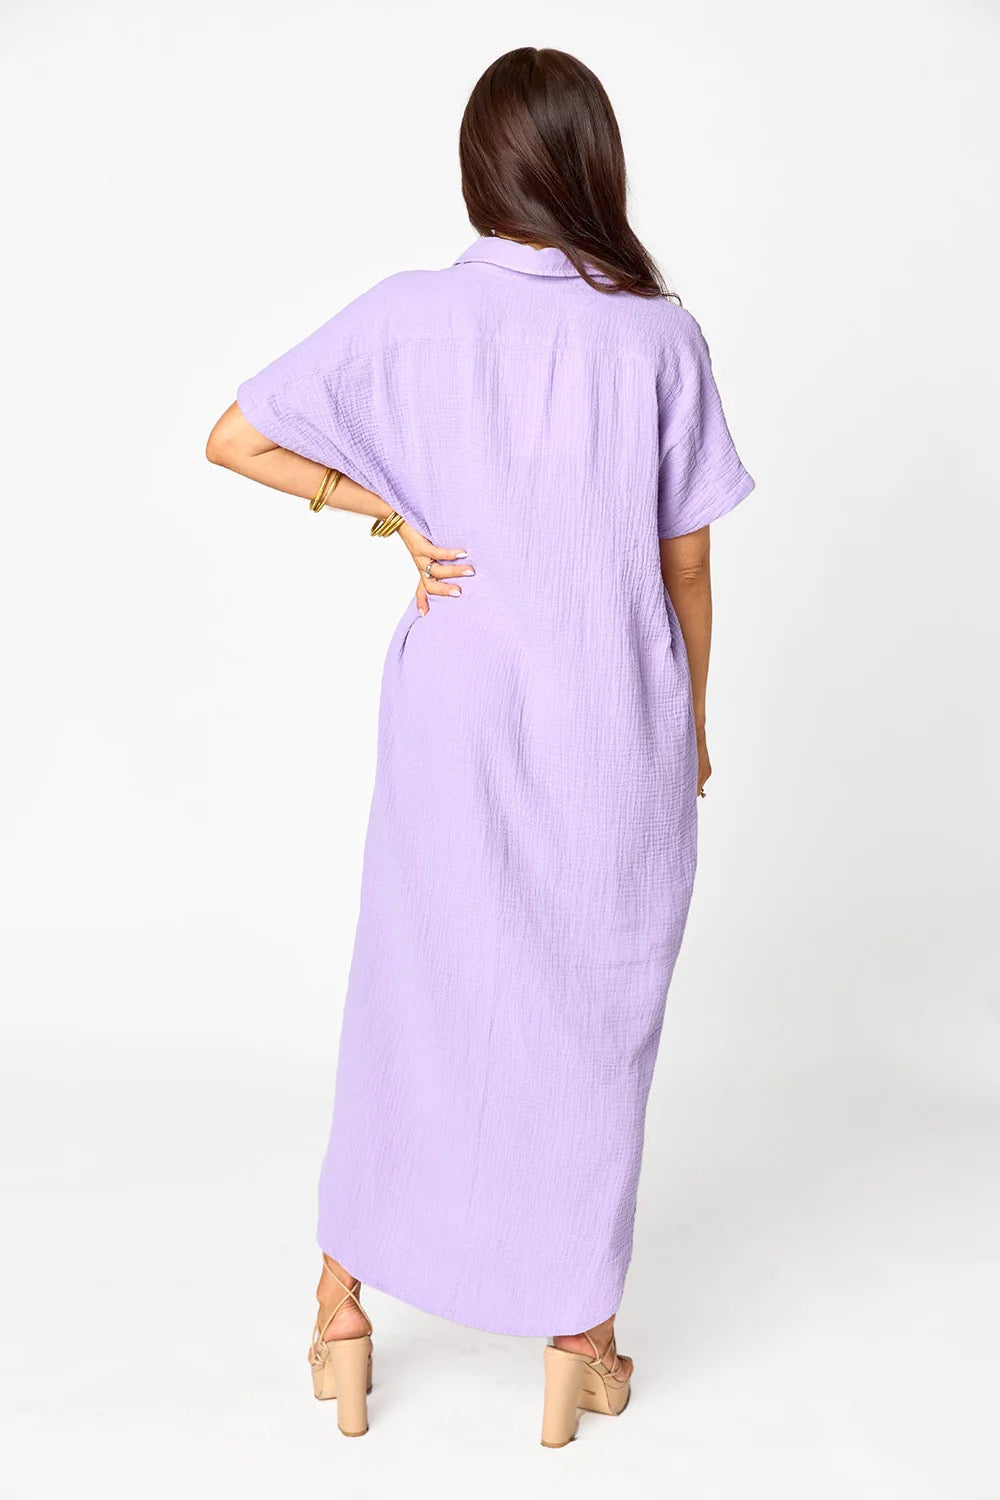 Buddy Love Carmen Caftan-Dresses-Buddy Love-Shop with Bloom West Boutique, Women's Fashion Boutique, Located in Houma, Louisiana